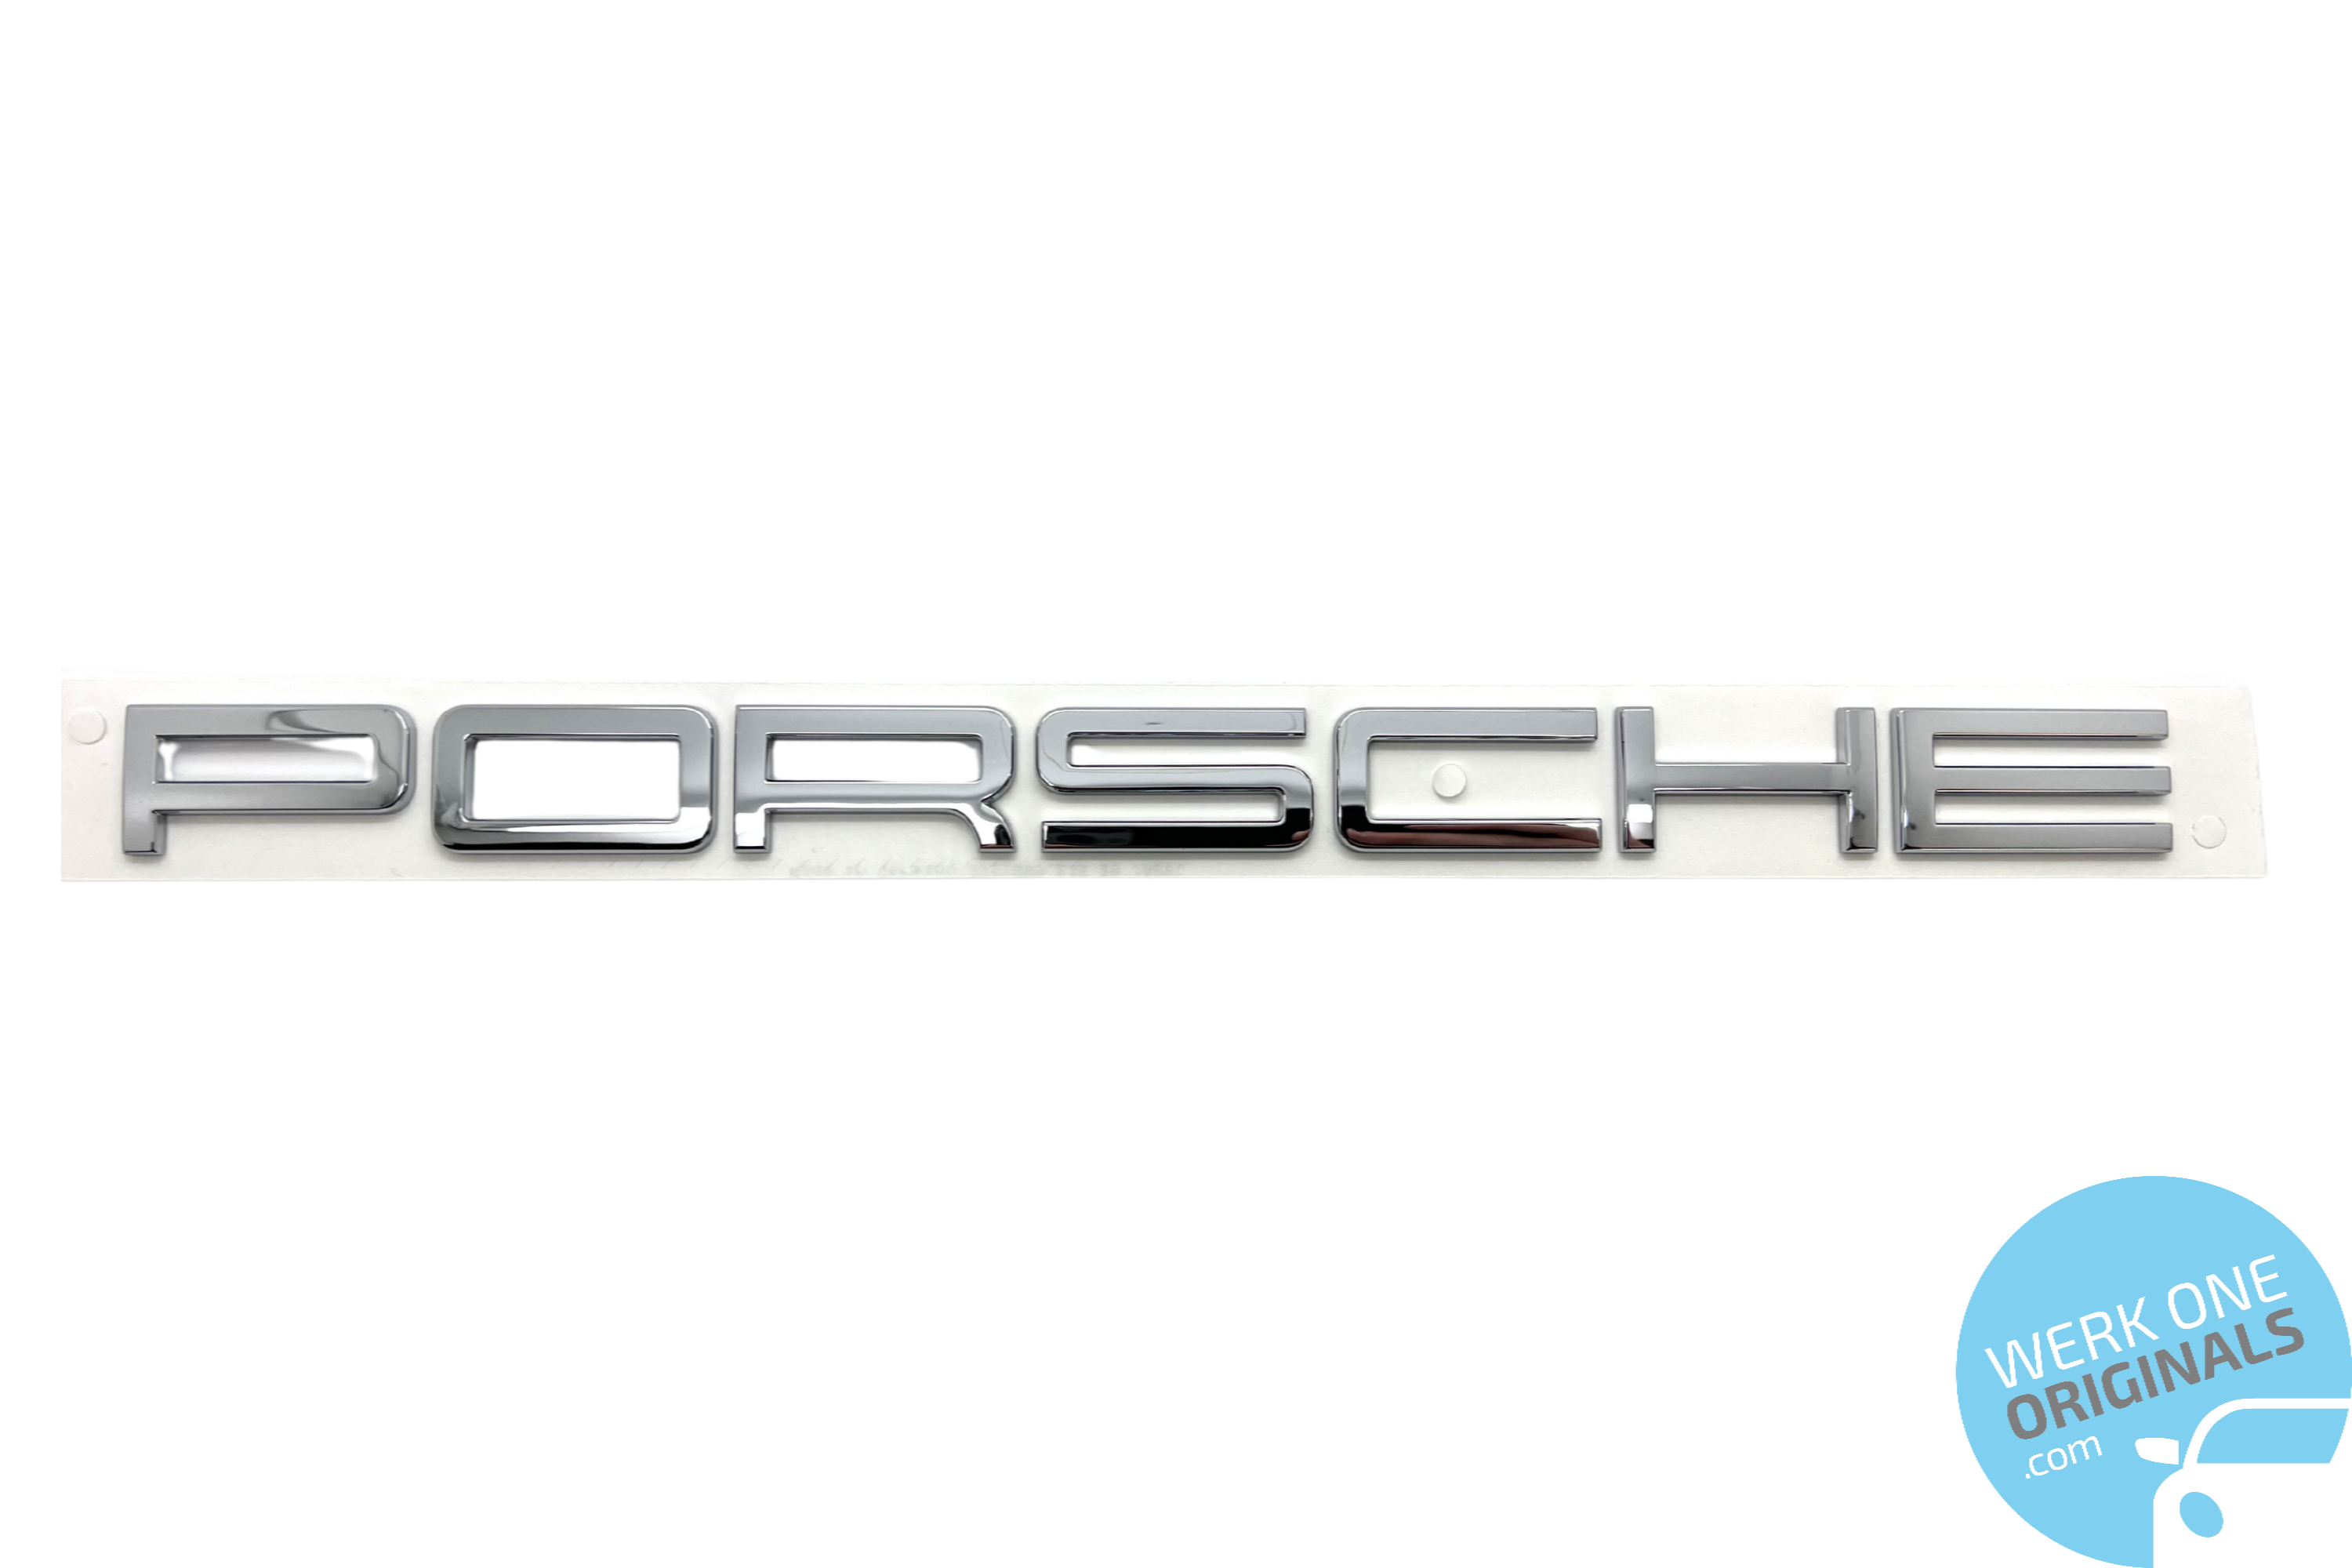 Porsche Official 'Porsche Panamera 4S' Rear Badge Decal in Chrome Silver for Panamera 4S Type 907 & 970 Models